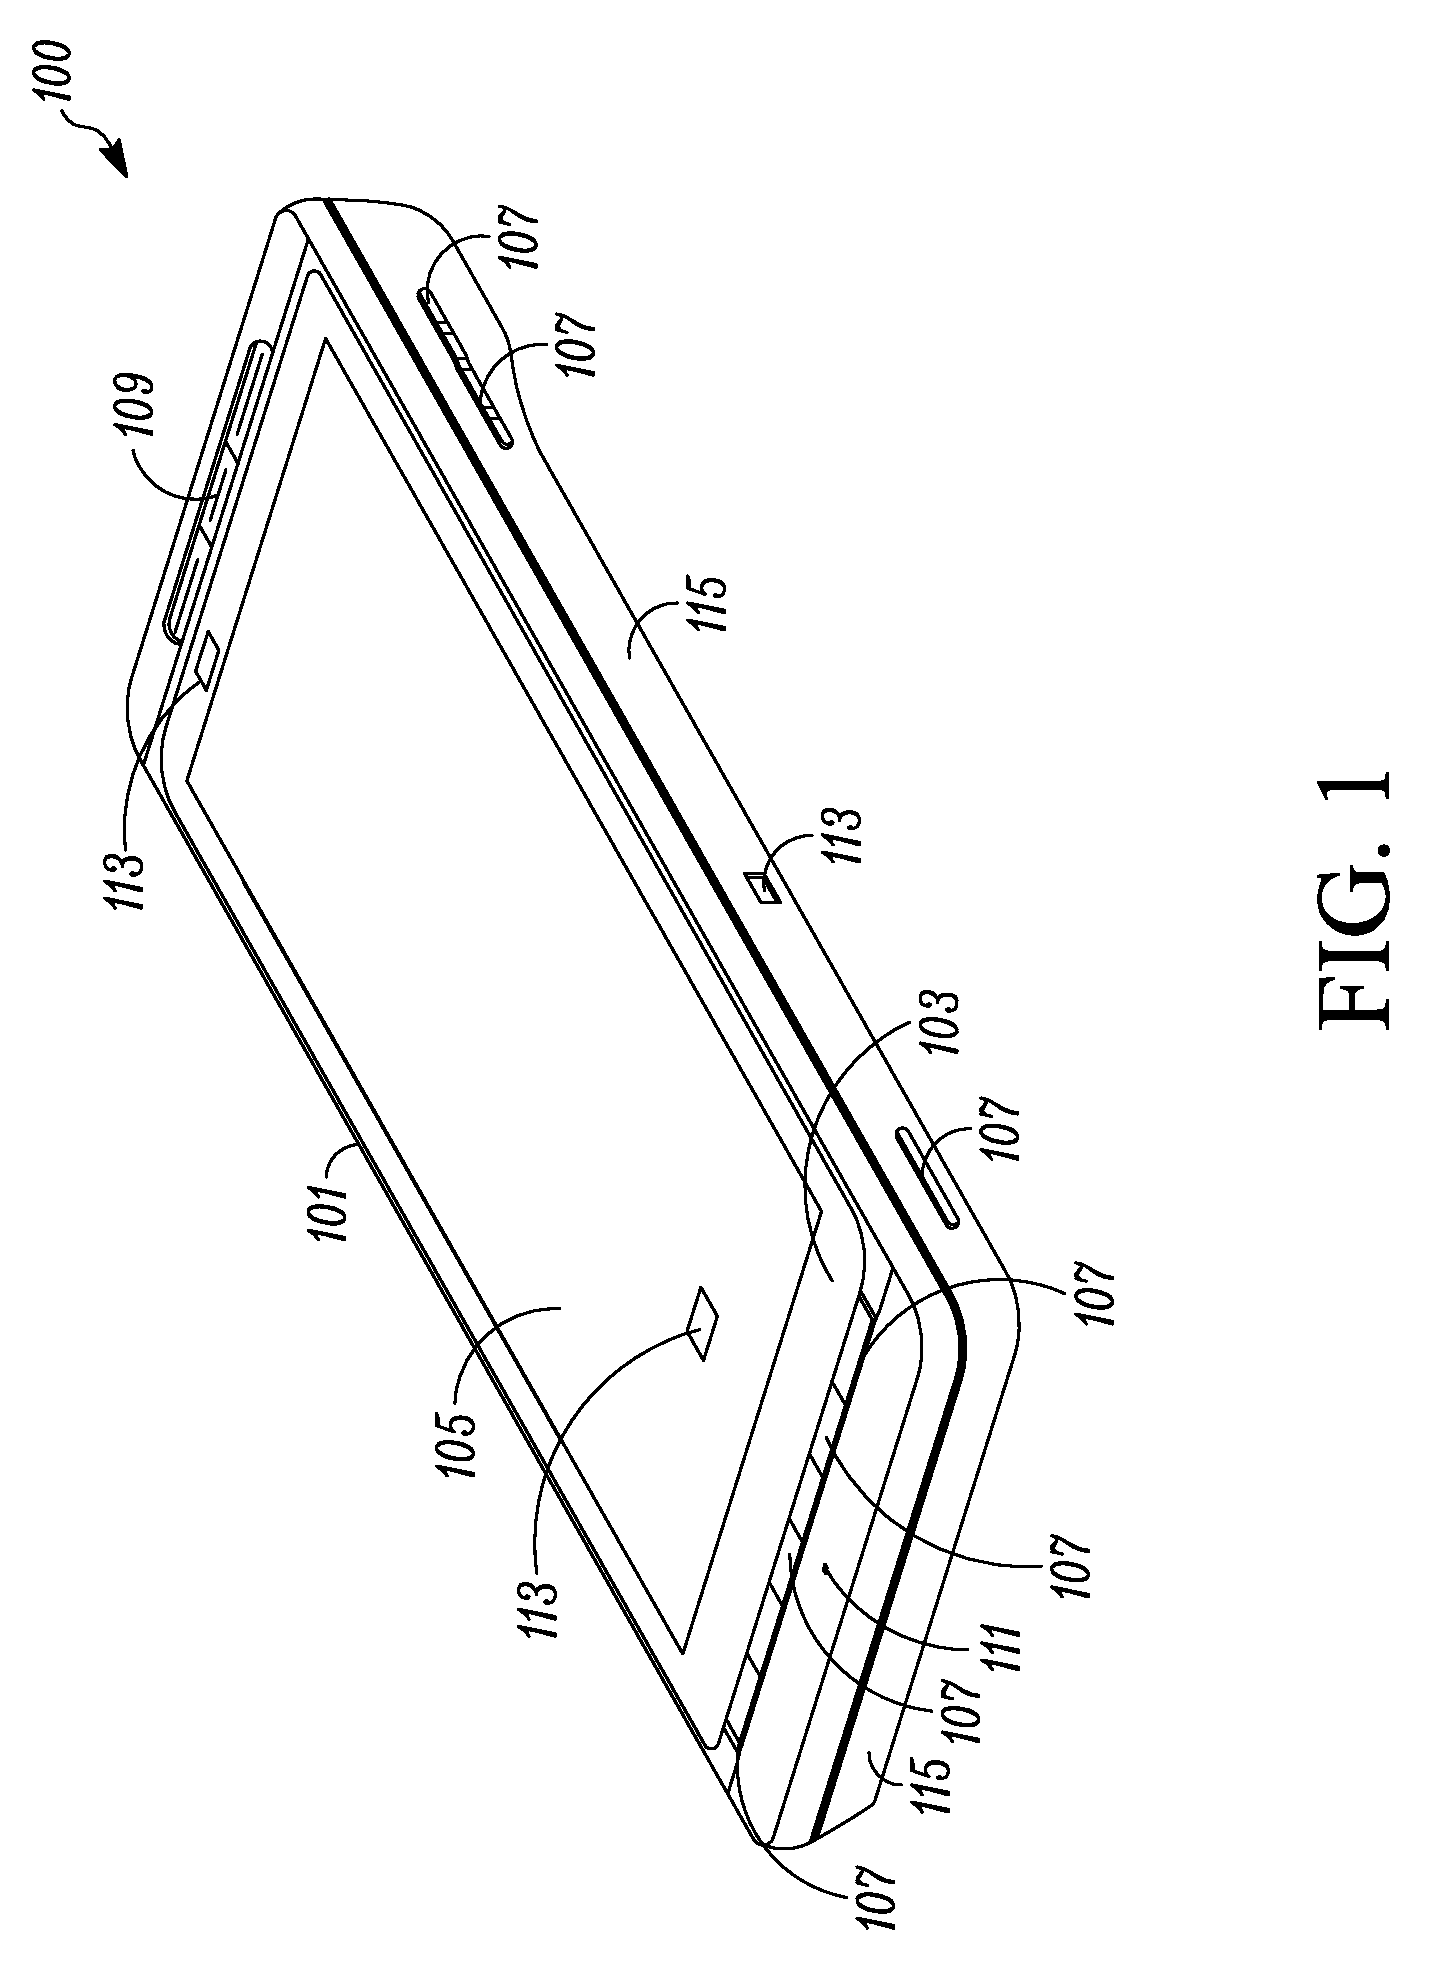 Electronic device with enhanced notifications